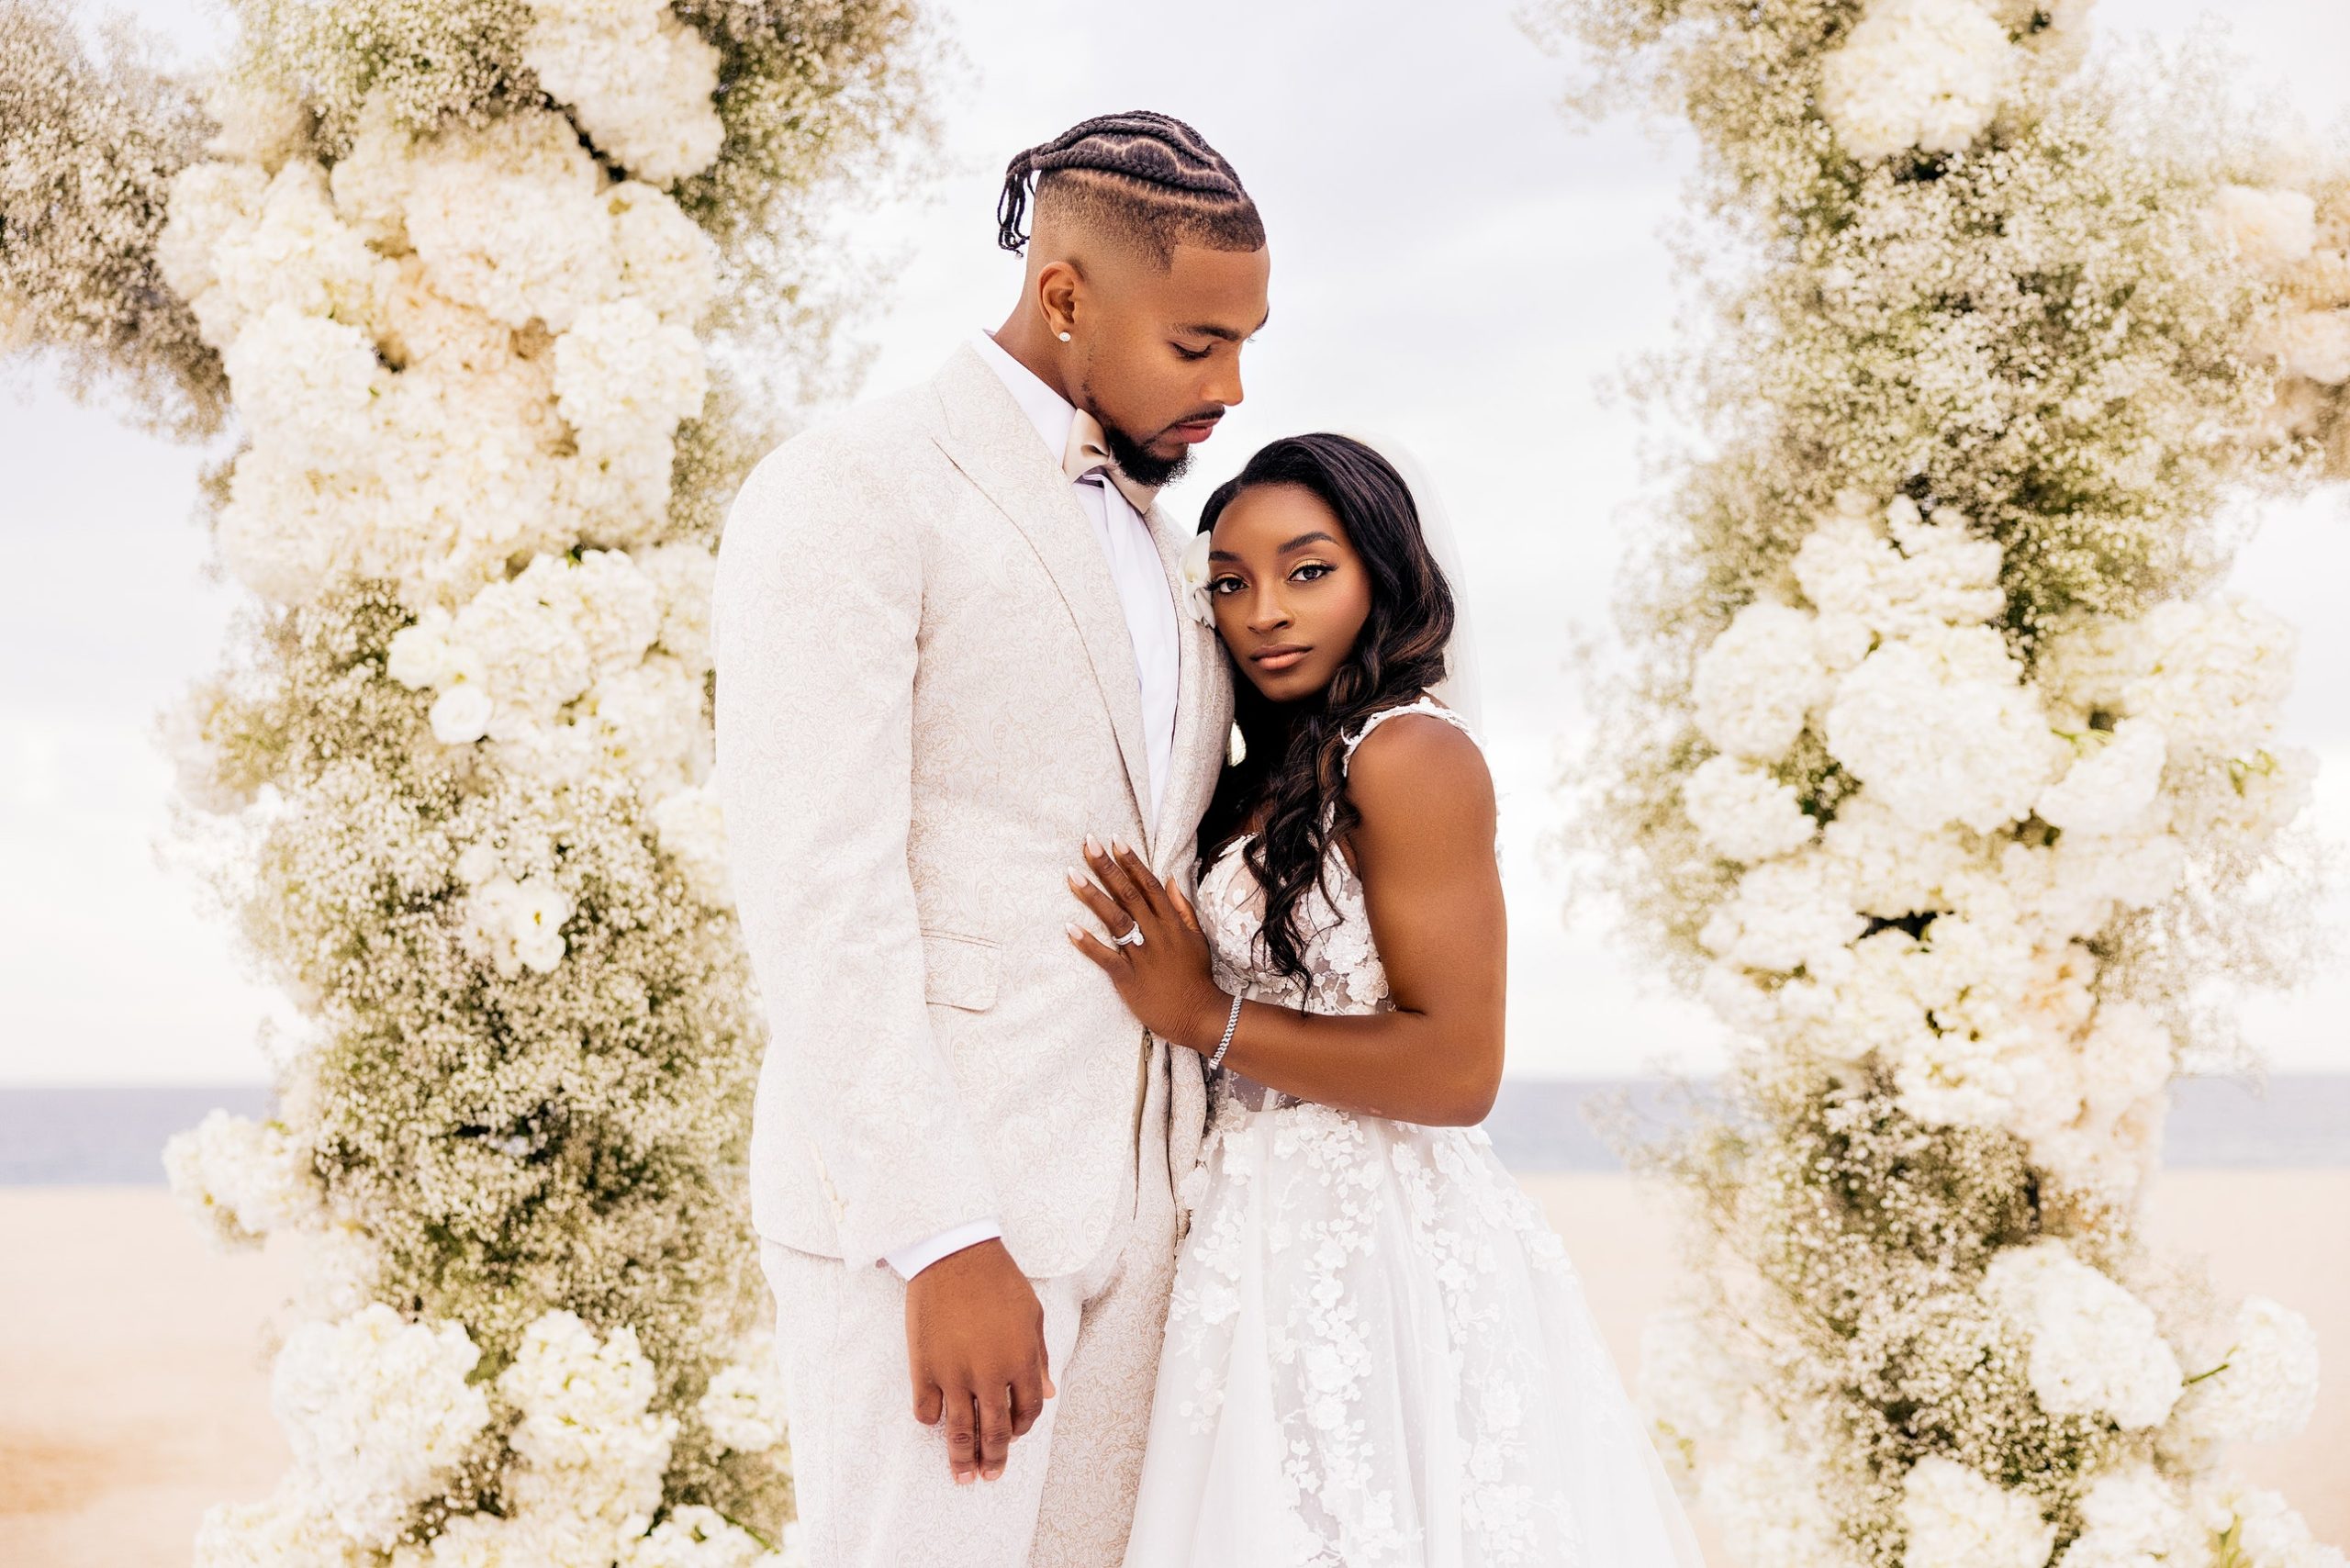 This is what Simone Biles and Jonathan Owens’ wedding looked like